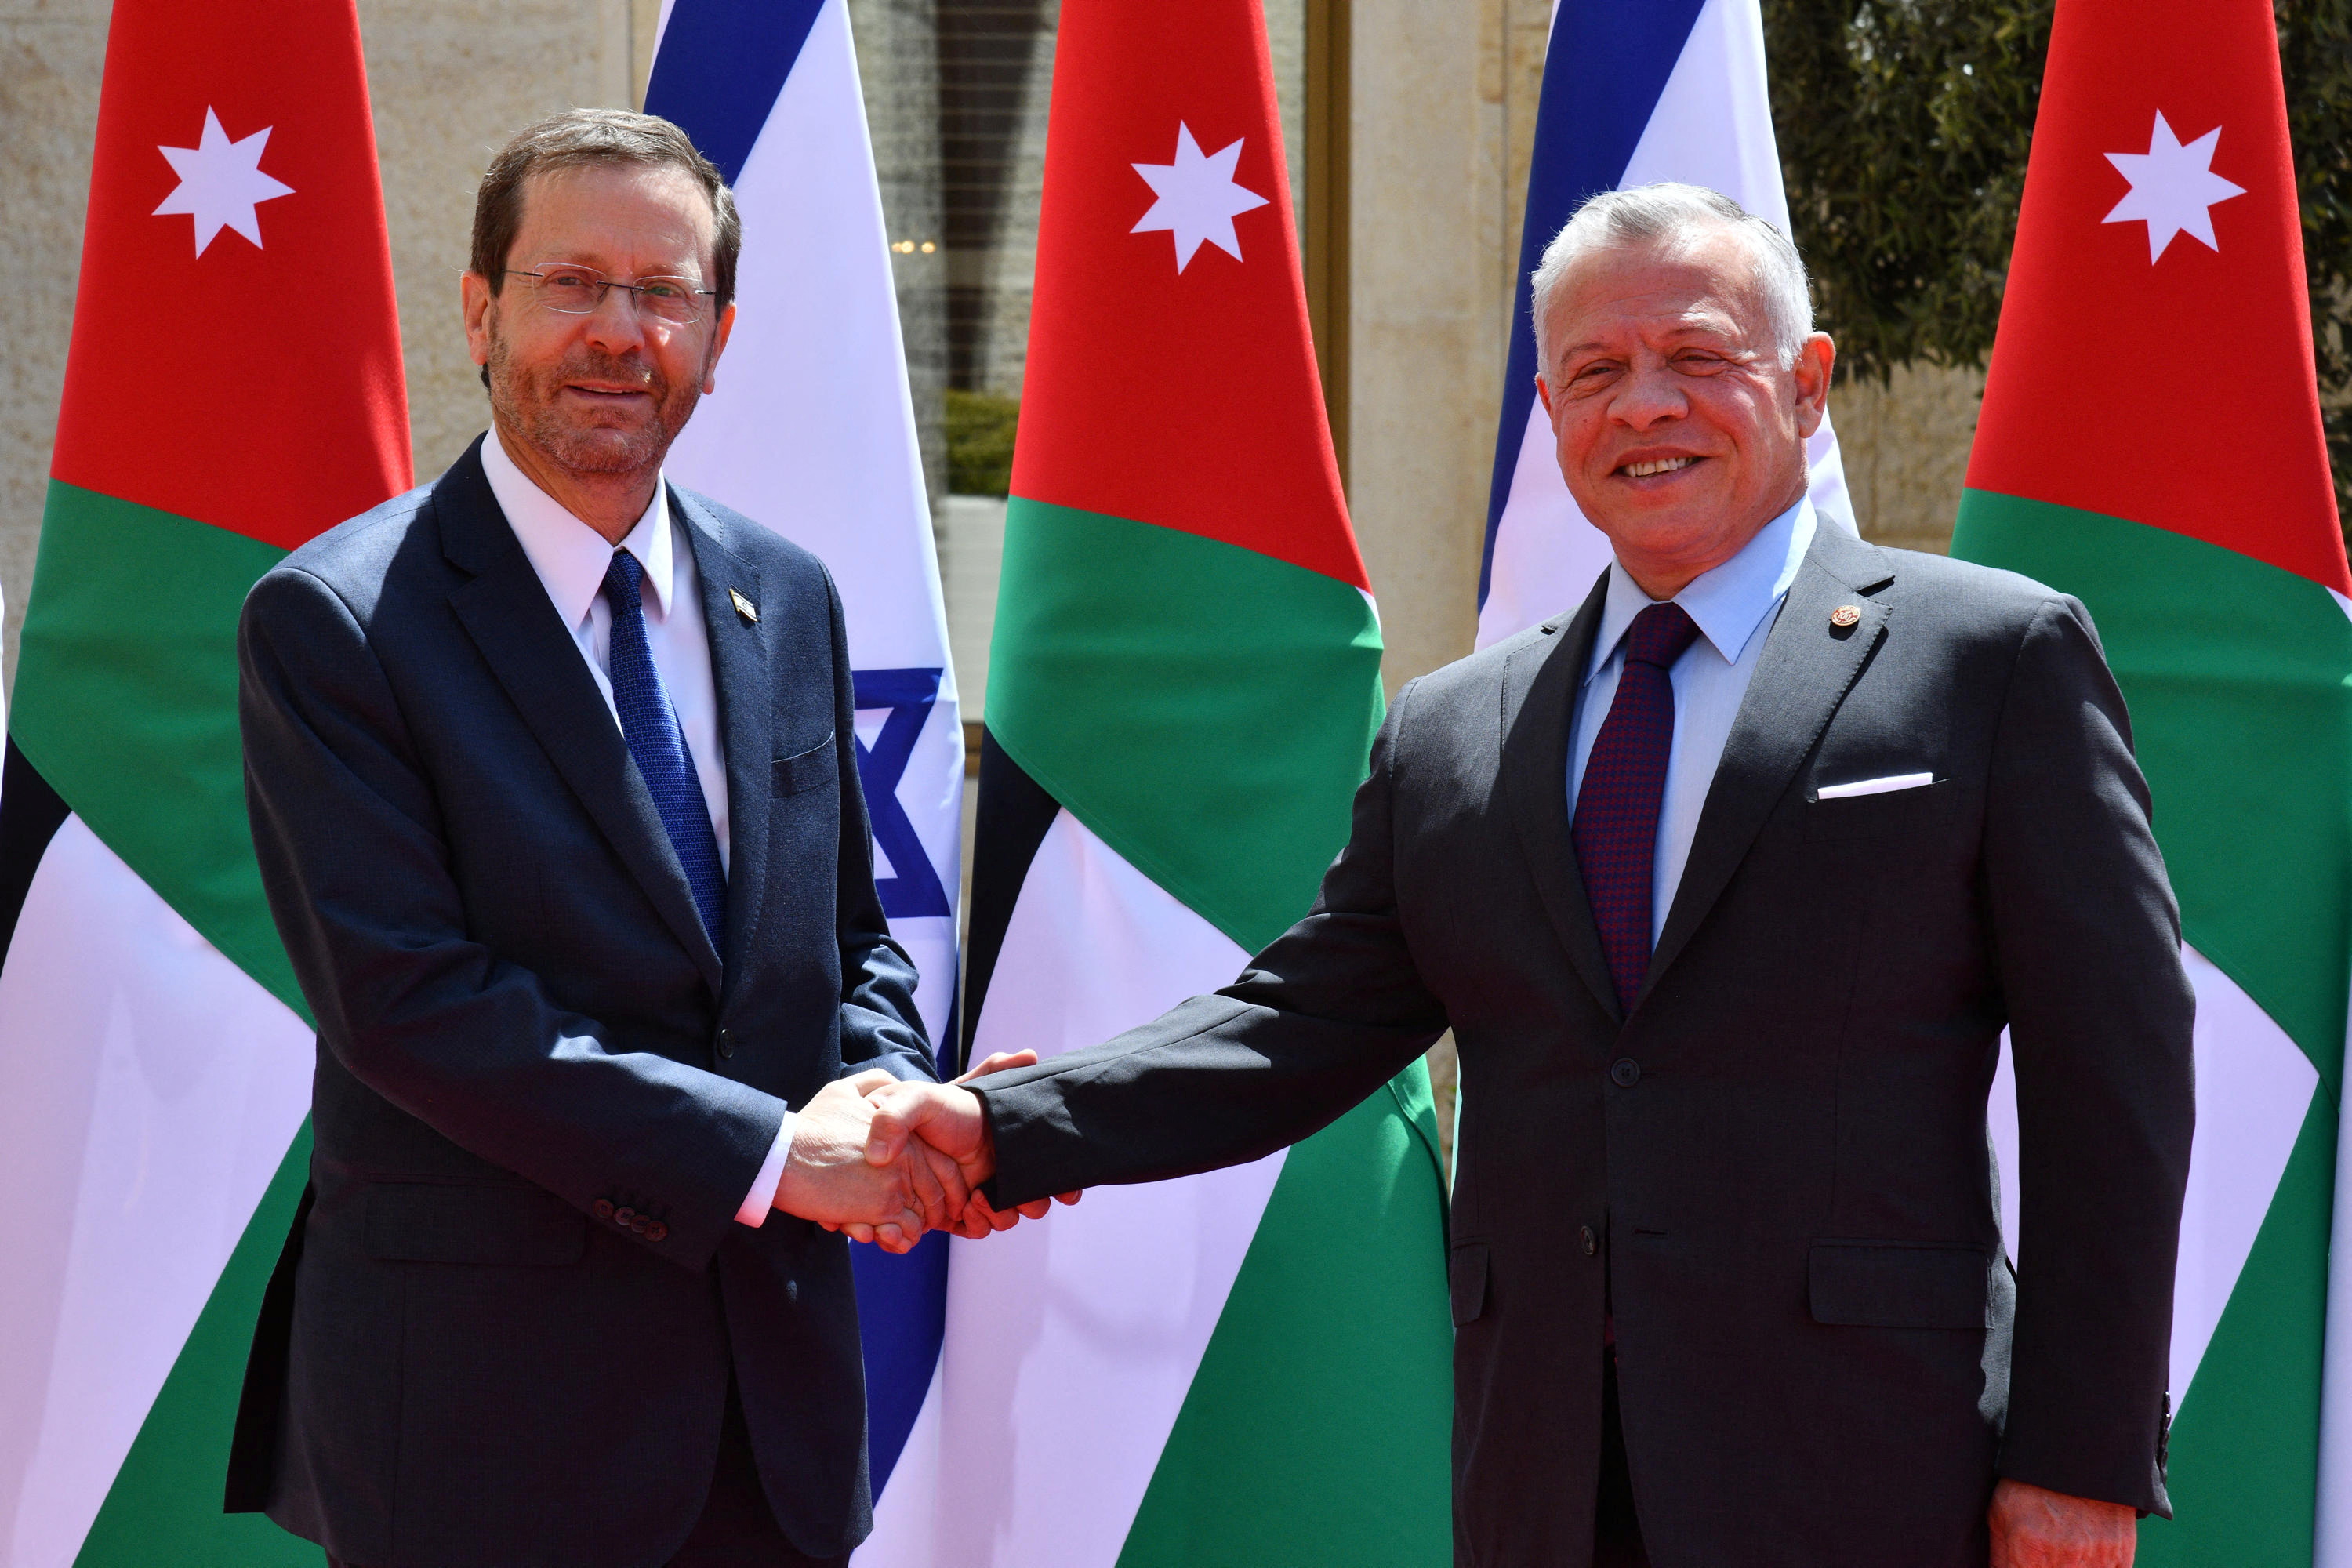 Jordan and Israel leaders urge calm after historic meeting following spike in violence |